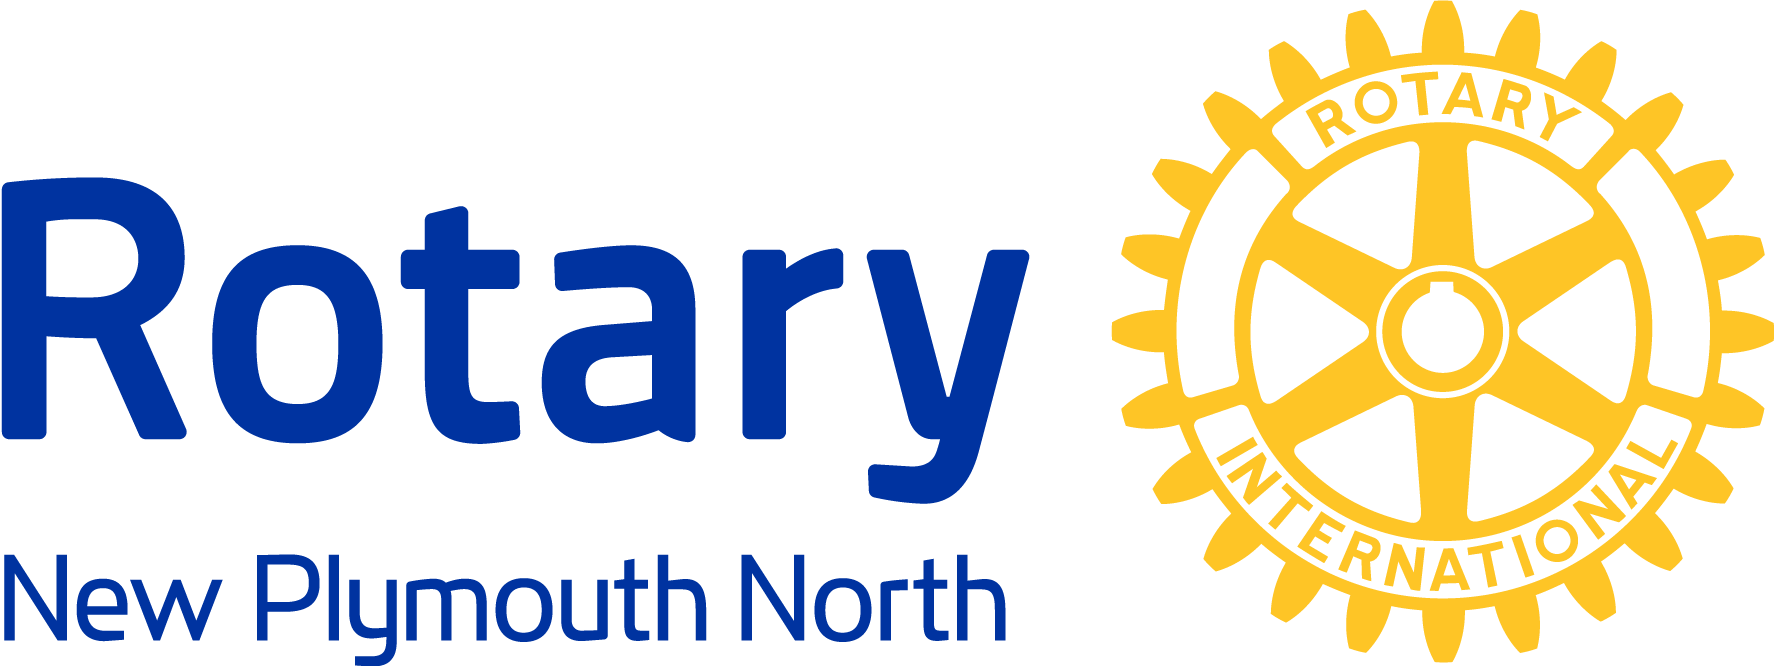 Rotary Club new Plymouth North